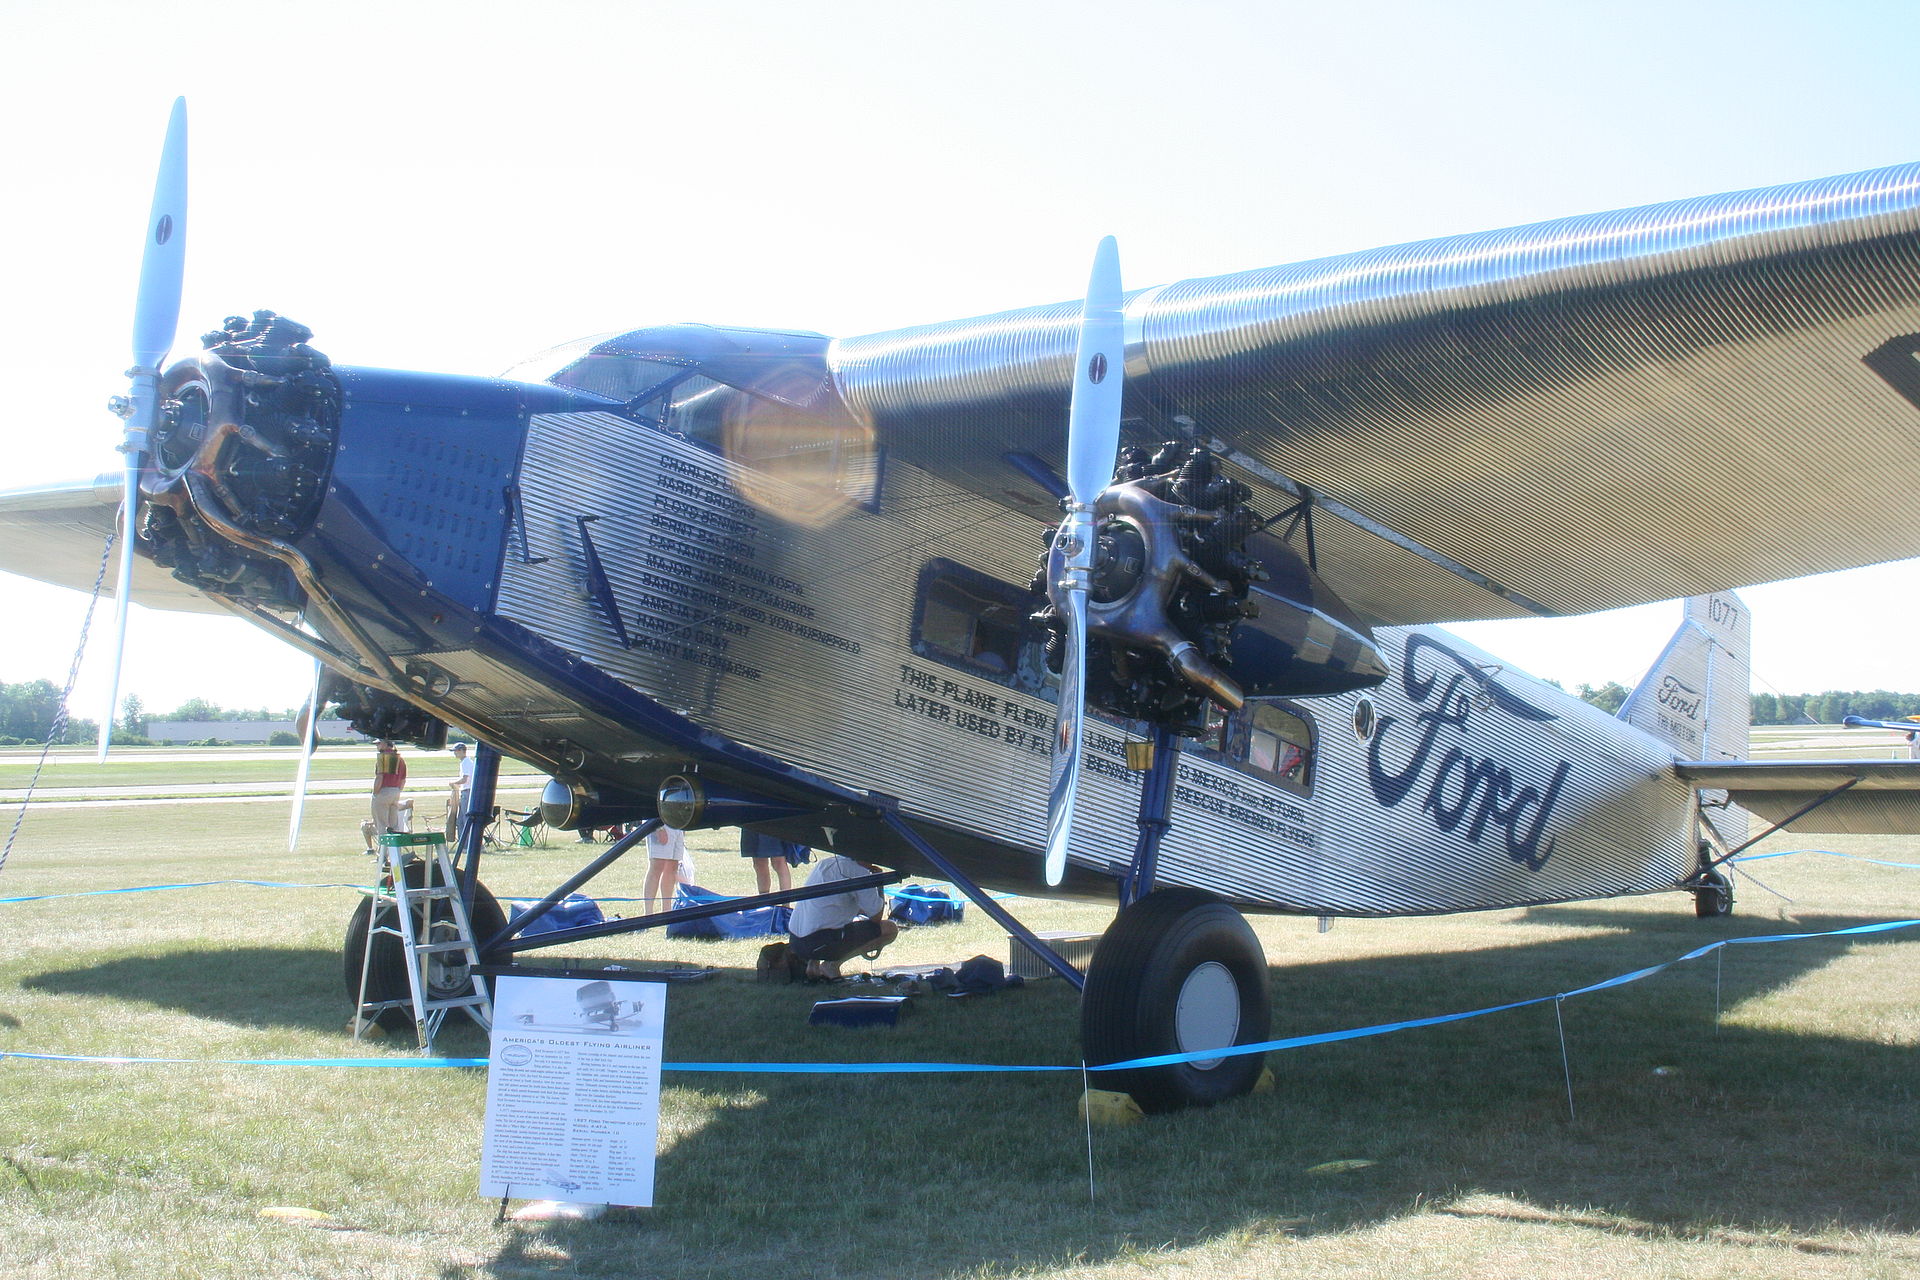 A 1927 4-AT-A Ford Tri-Motor airplane similar to the one acquired by the Liberty Aviation Museum. Image by Bzuk, courtesy of Wikimedia Commons